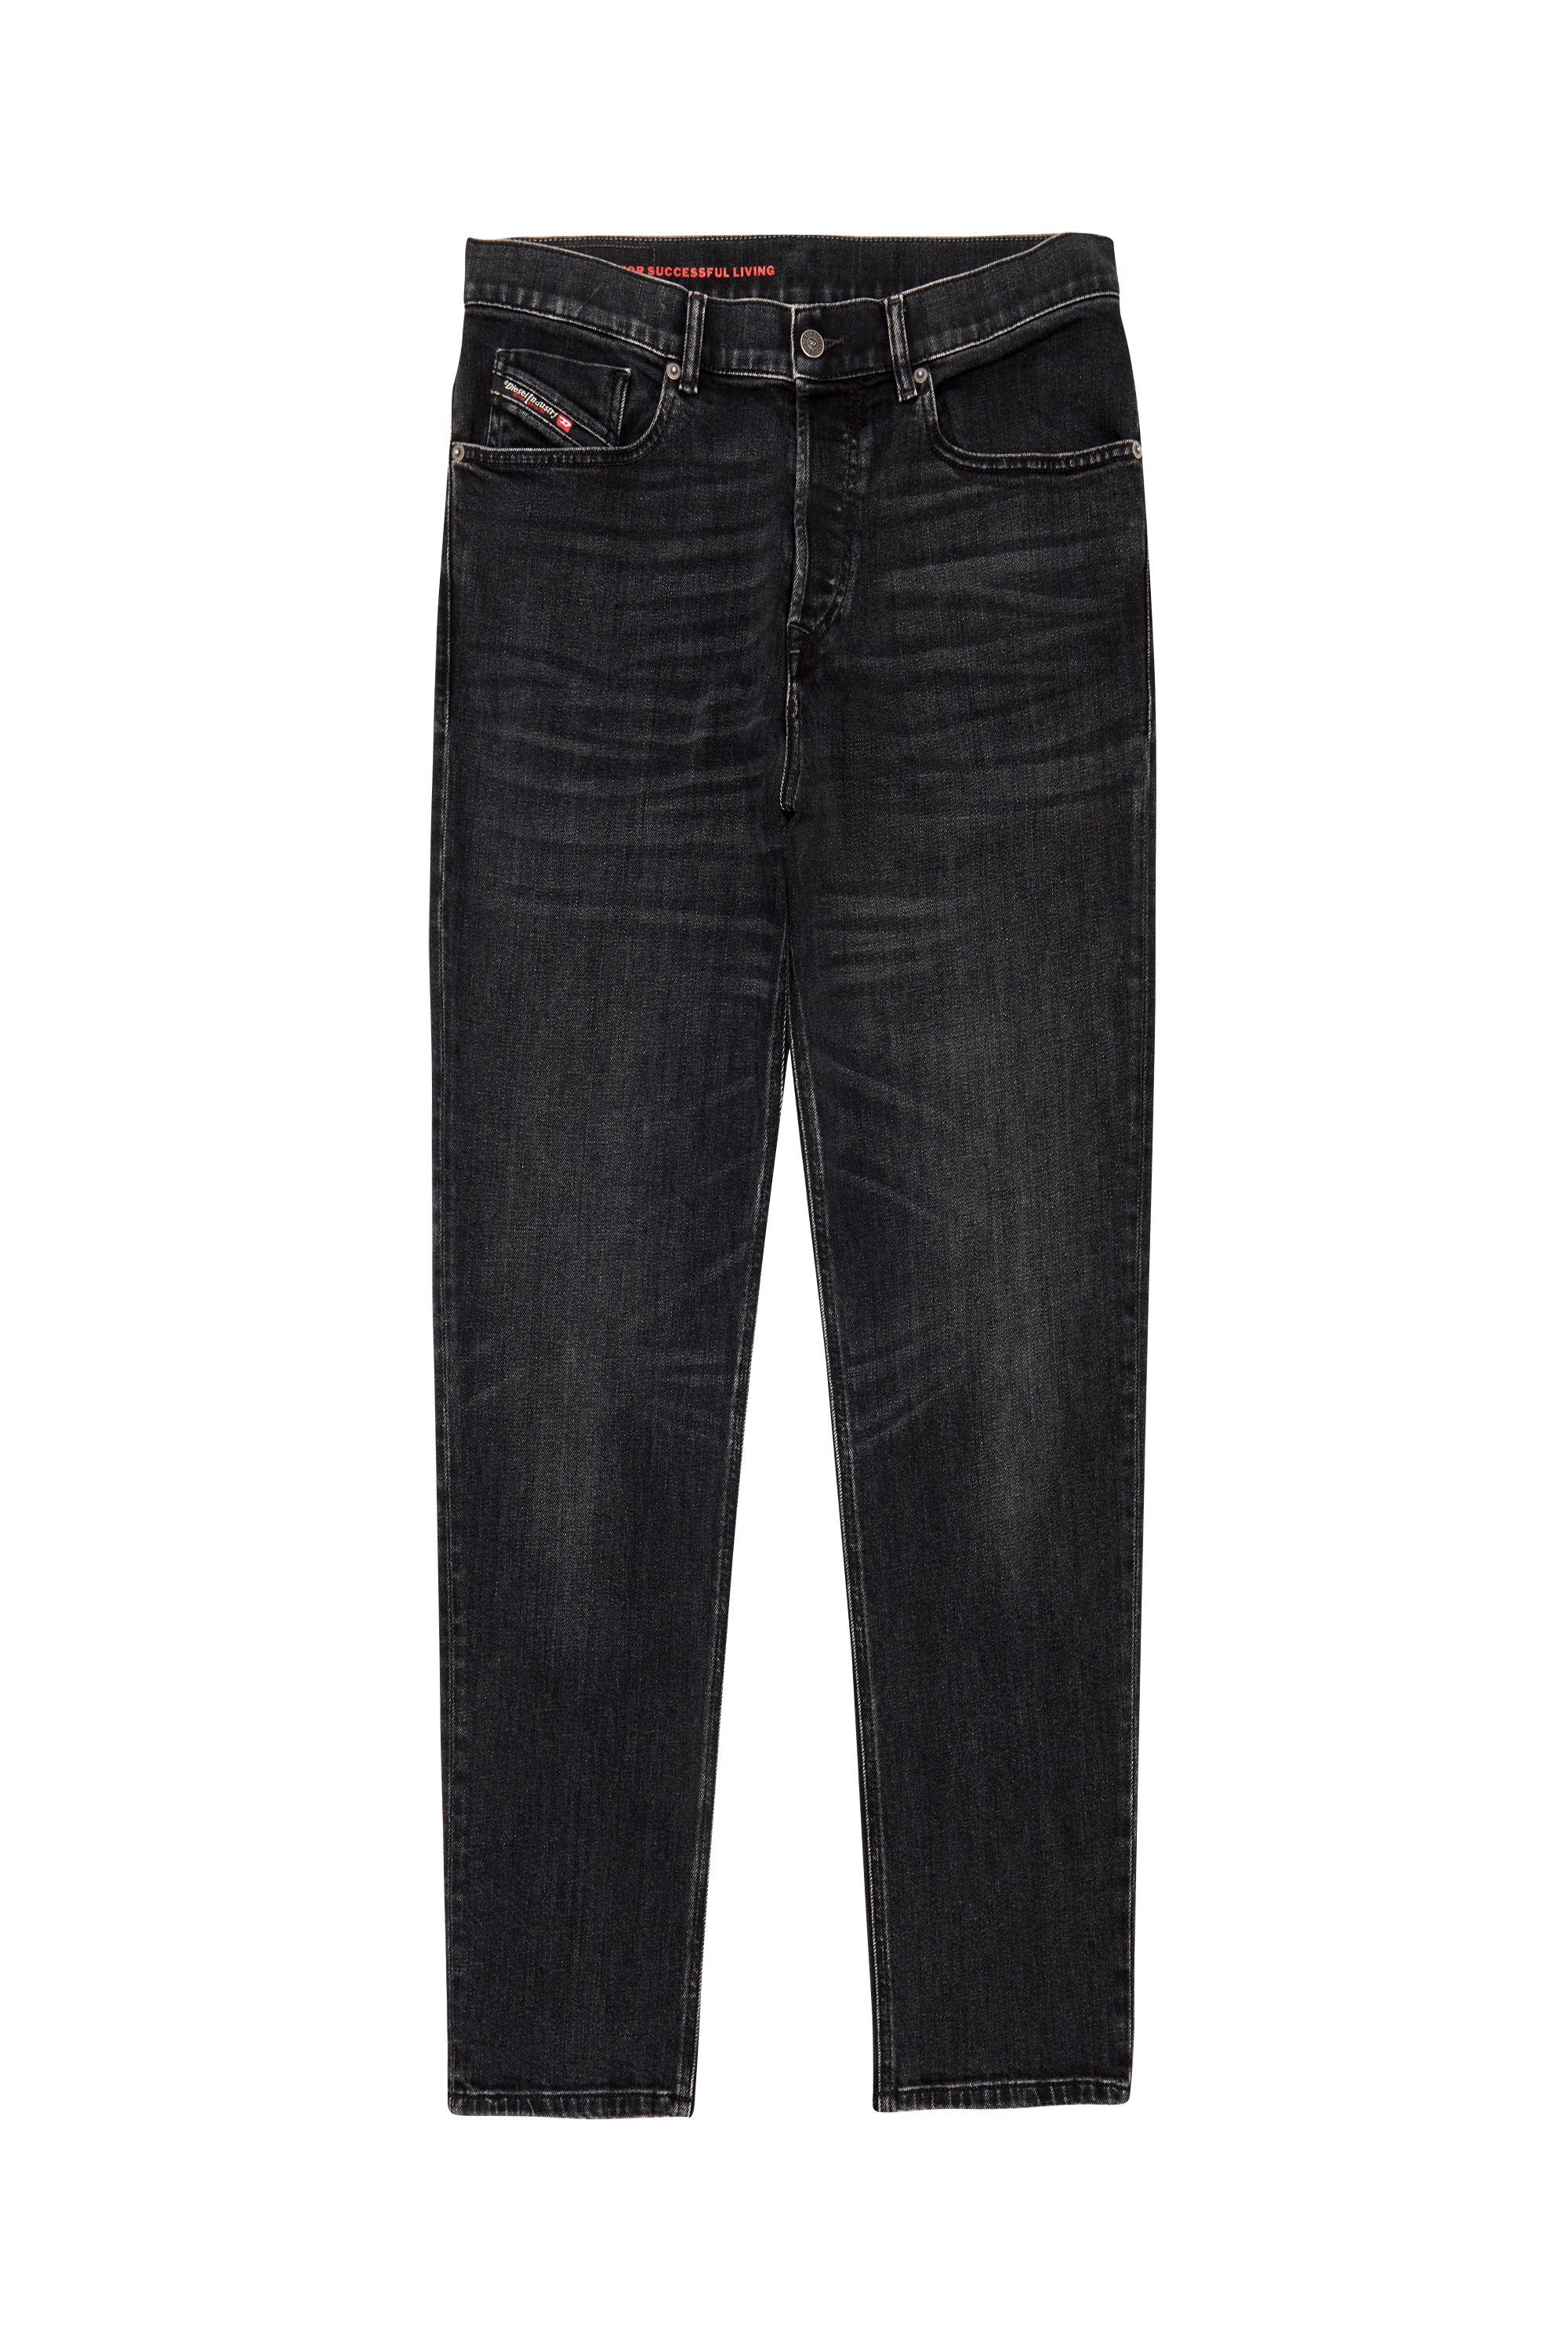 2005 D-FINING 09B83 Tapered Jeans, Negro/Gris oscuro - Vaqueros